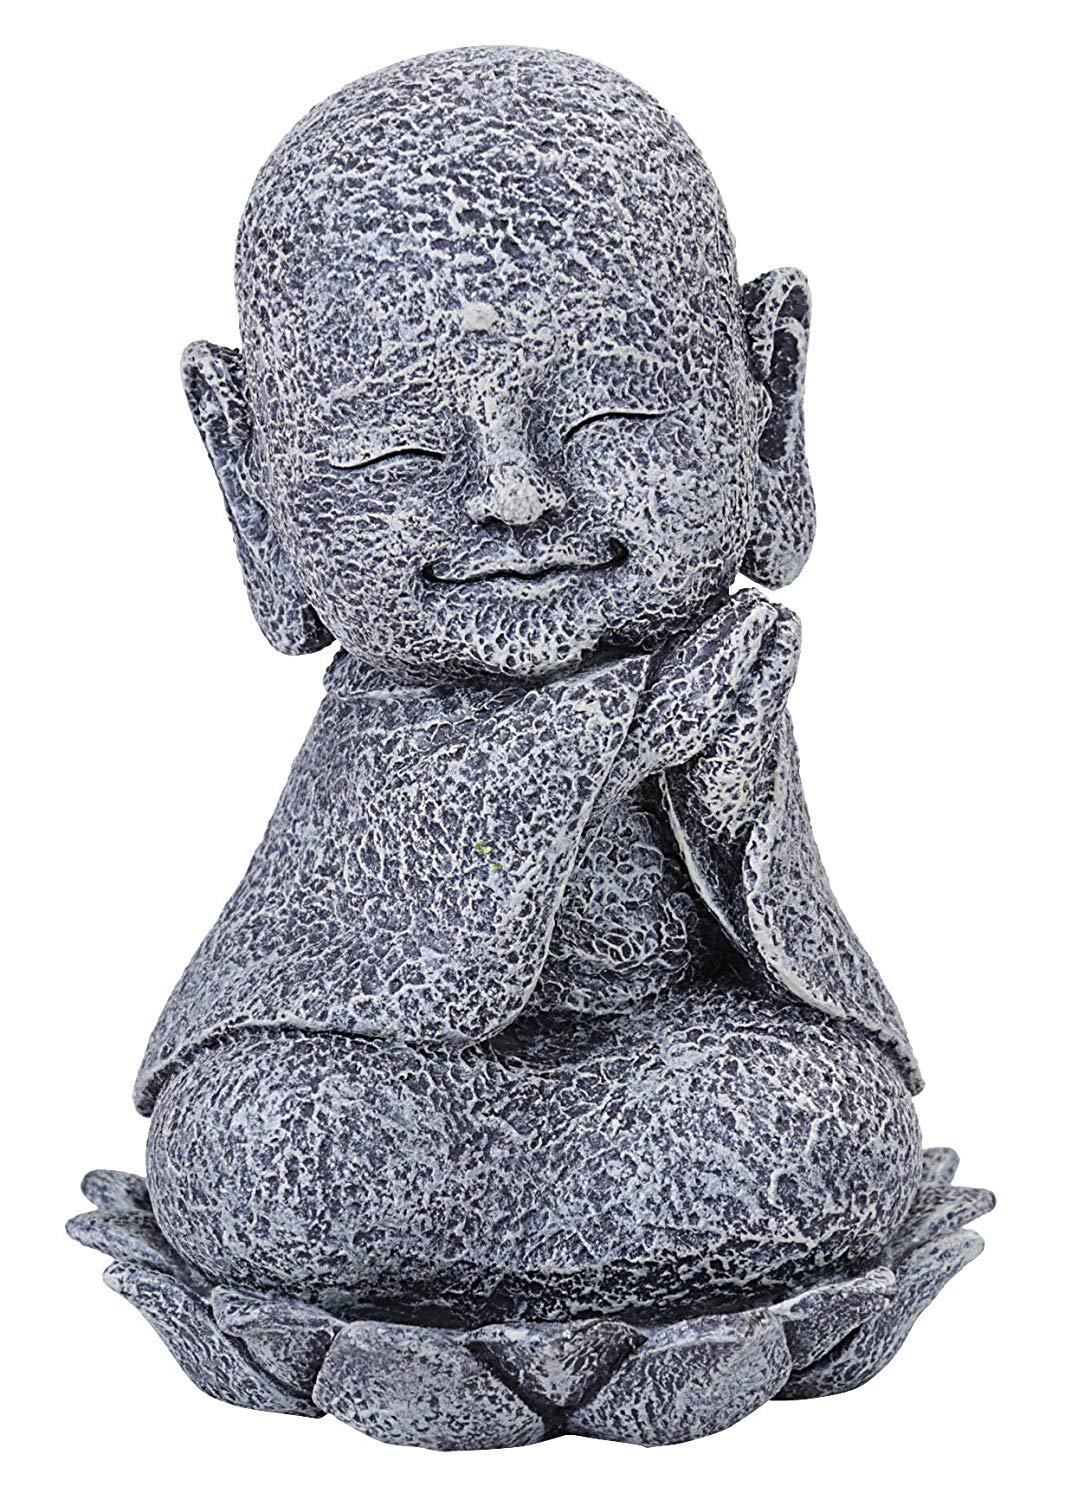 SUMMIT COLLECTION Seated Jizo with Head Titled and Clasped Hands